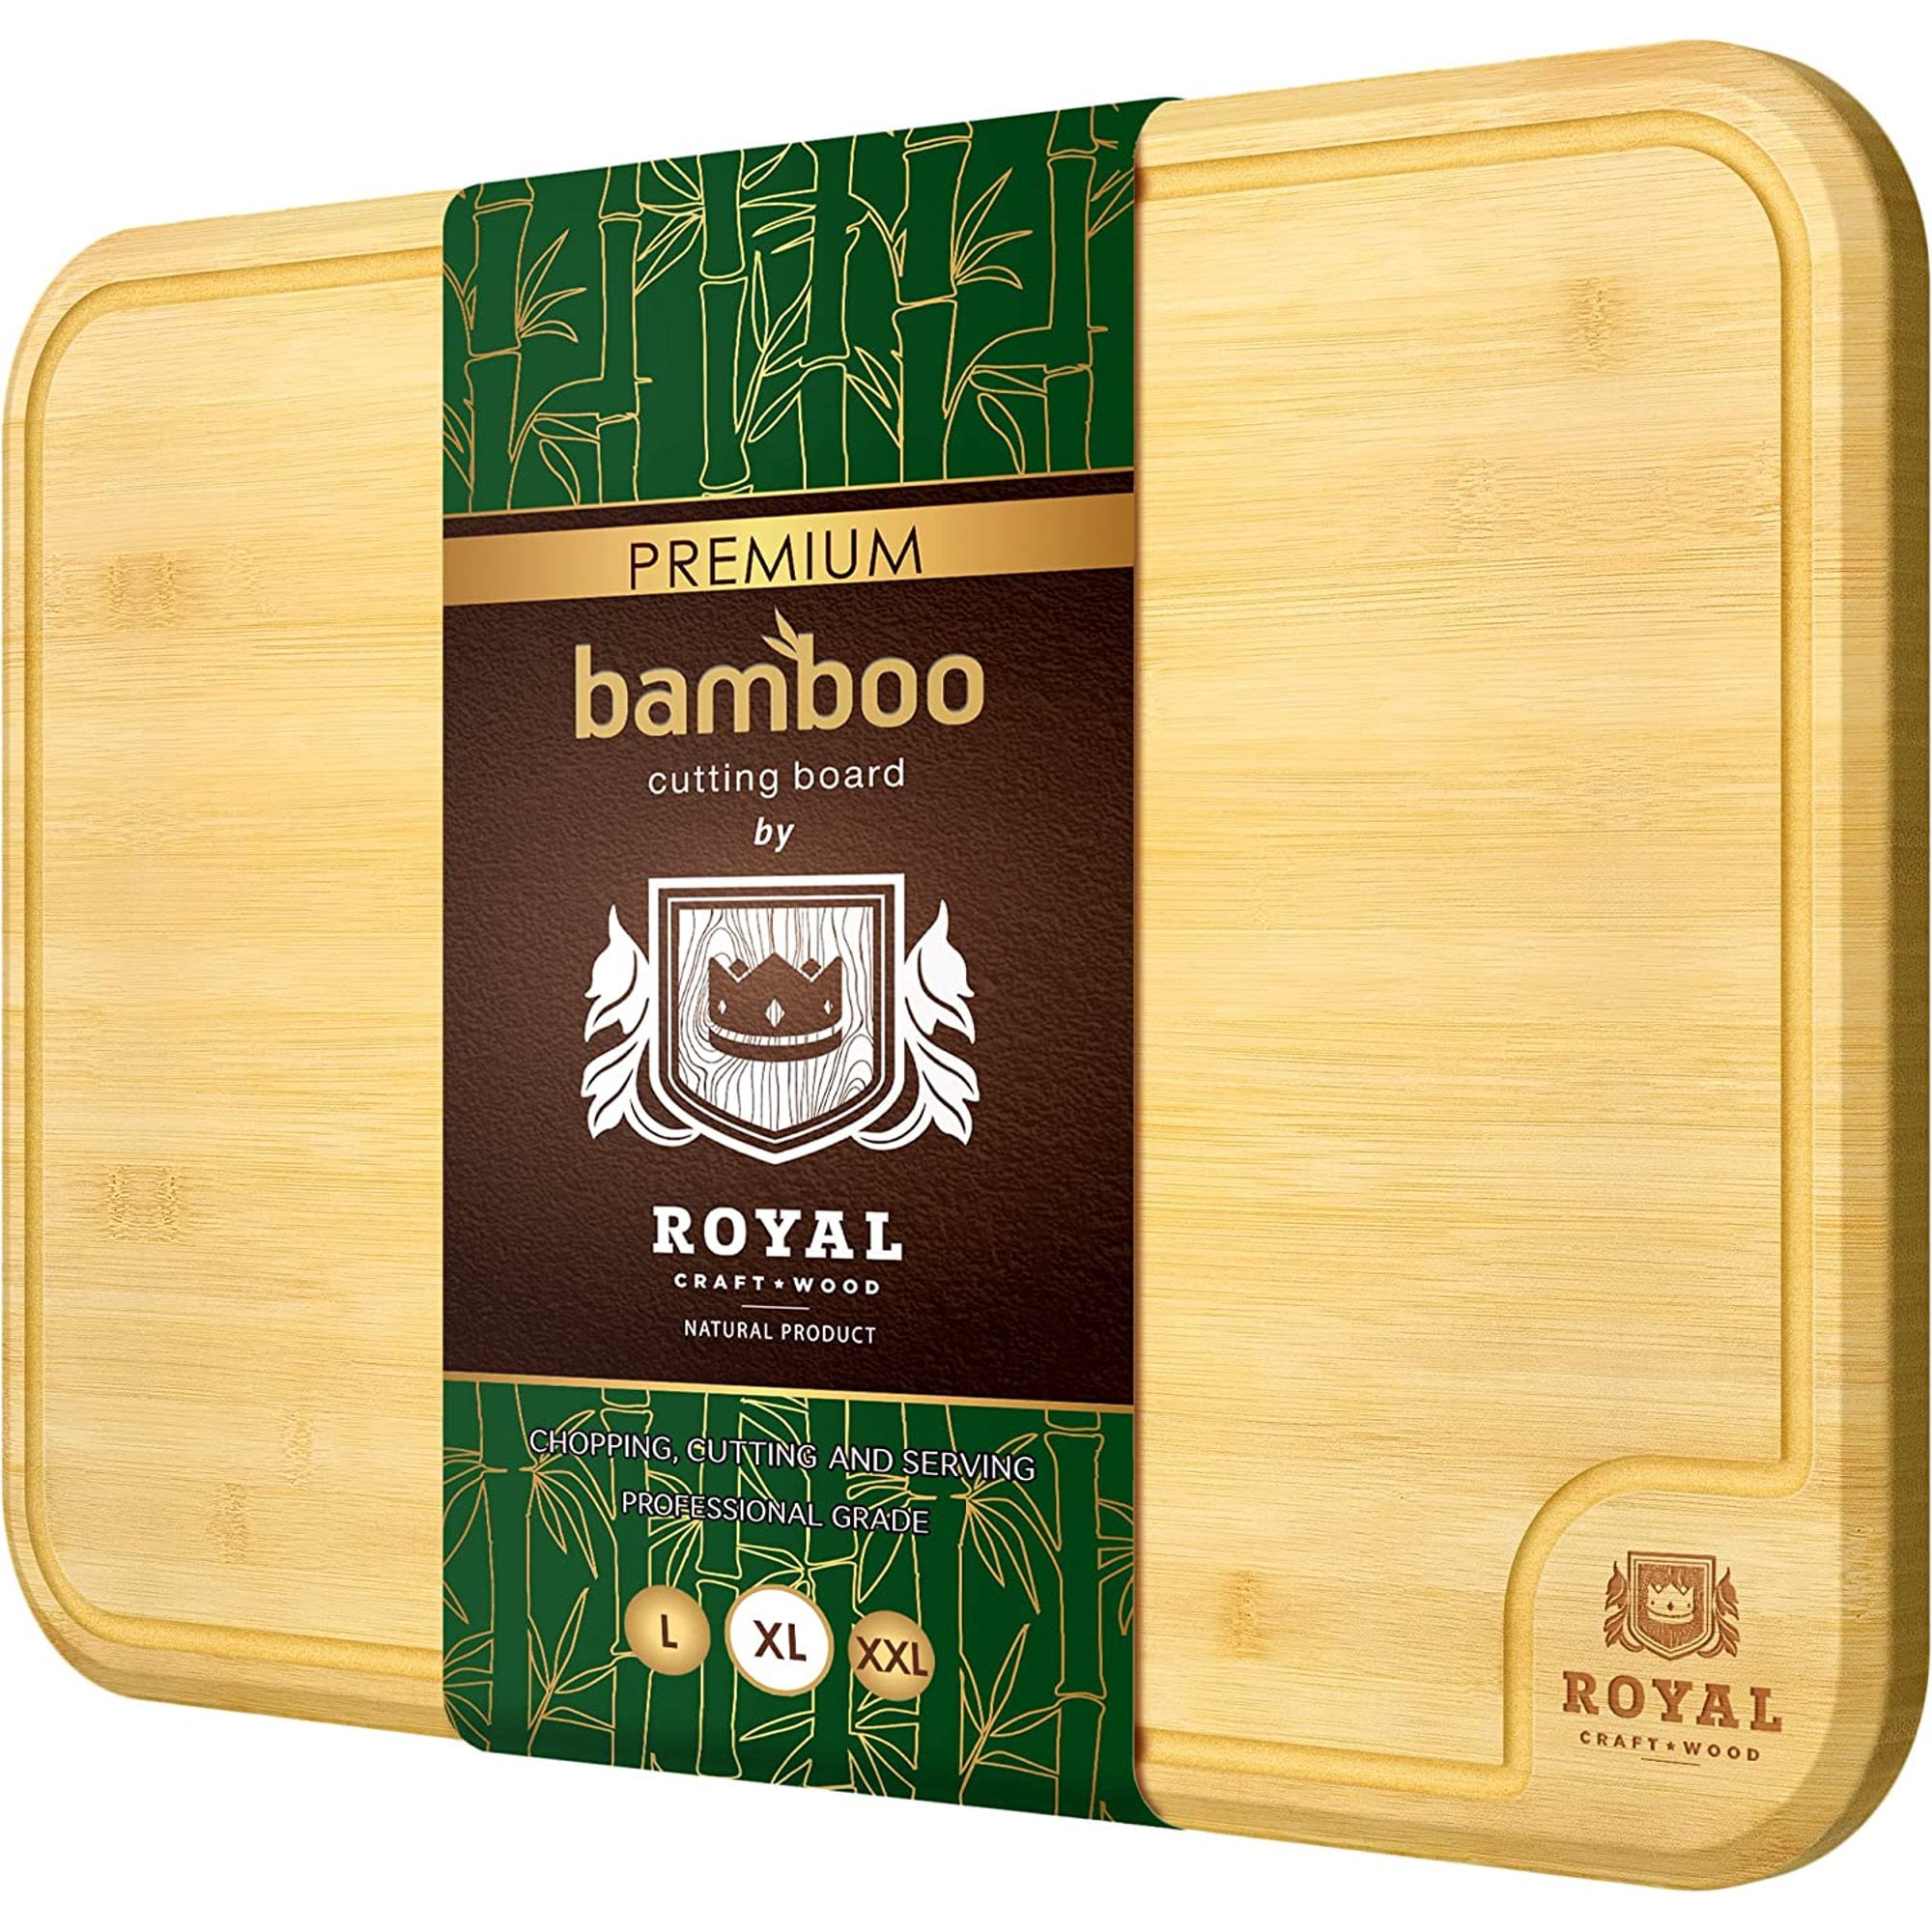  Wooden Cutting Boards for Kitchen: Organic Bamboo Wood